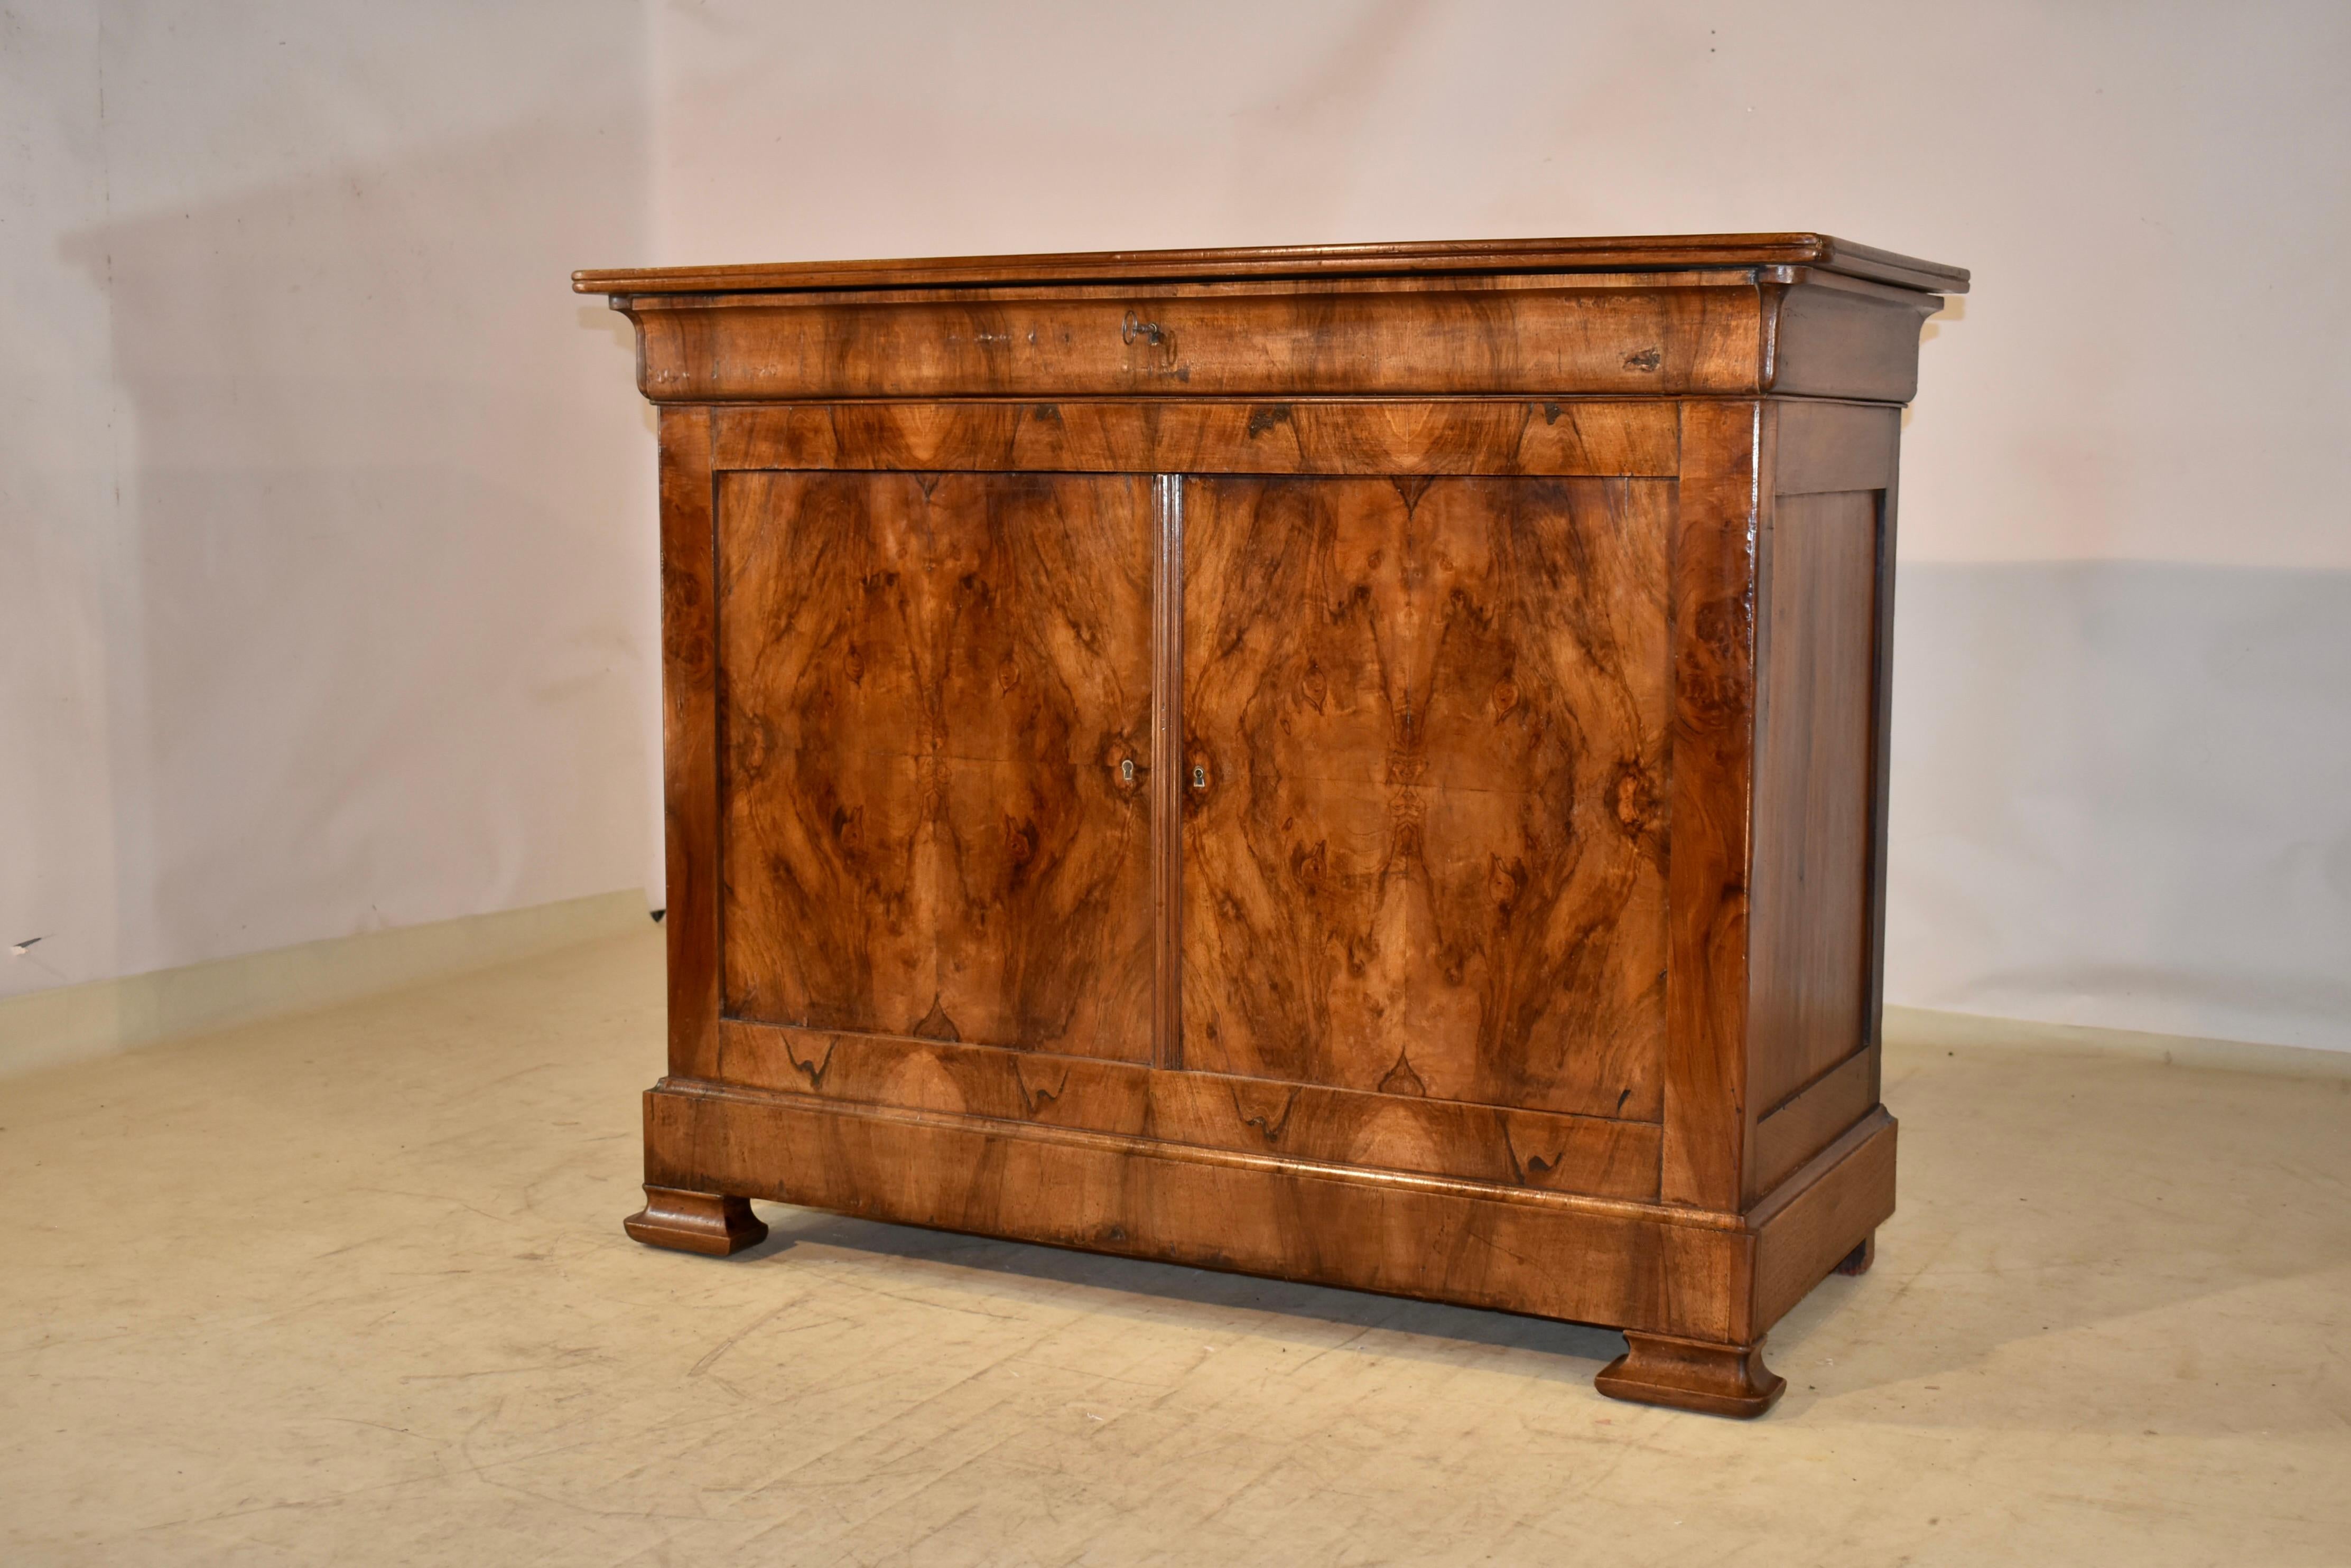 19th century Louis Philippe buffet from France with banding around the top, over simple paneled sides. There is a single drawer in the front over two doors, which open to reveal shelving. The doors are made from solid walnut and are veneered in book